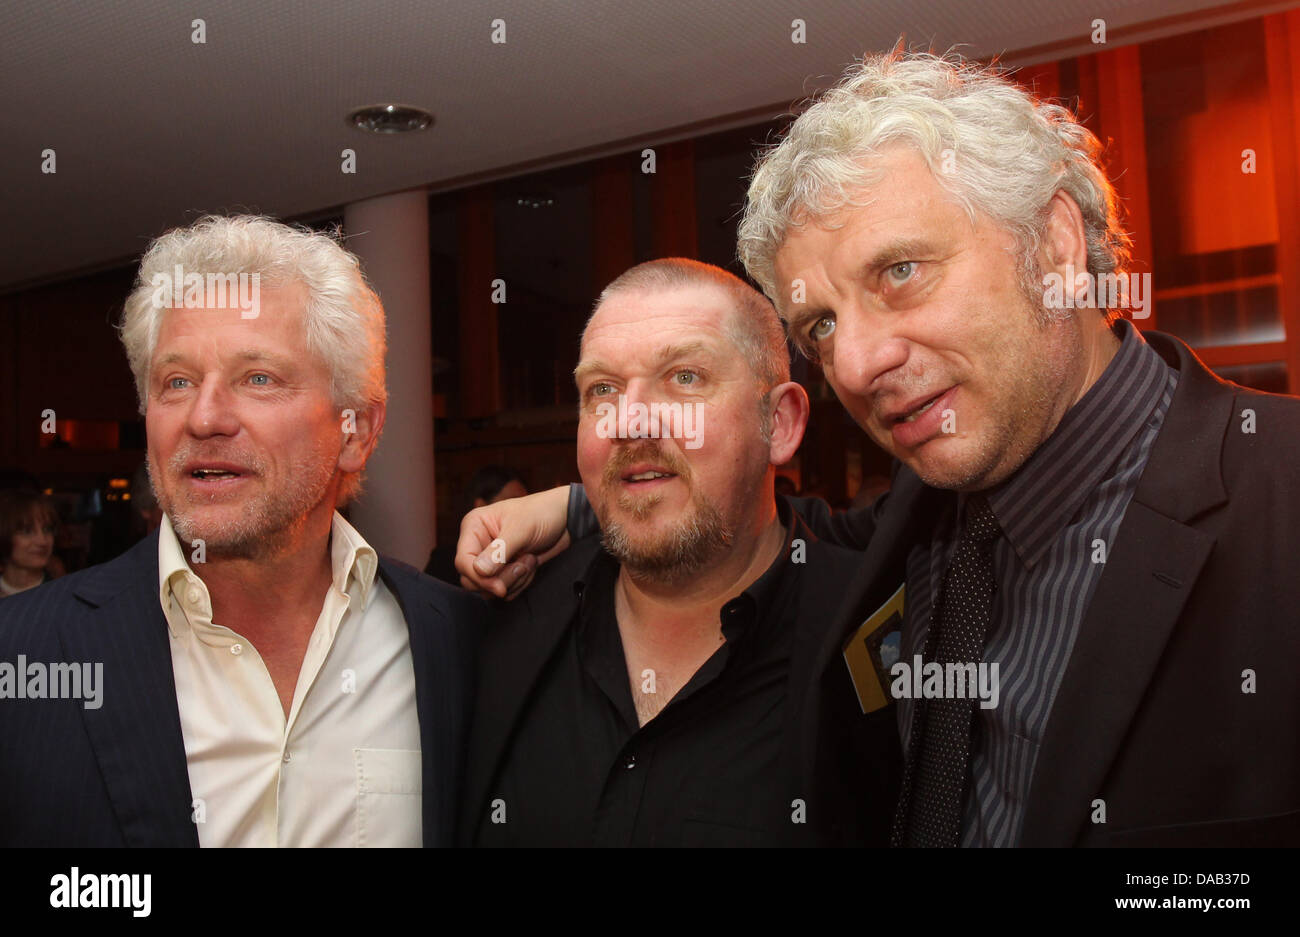 The police inspectors of the TV series Tatort Udo Wachtveitl (R) and Miroslav Nemec (L) pose with the presenter of the laudation Dietmar Baer during the gala evening of the crime fiction festival 'Tatort Eifel' in Daun, Germany, 24 September 2011. They were honoured with the Roland Film Prize earlier. The prize is named after the crime fiction director Juergen Roland and is awarded Stock Photo